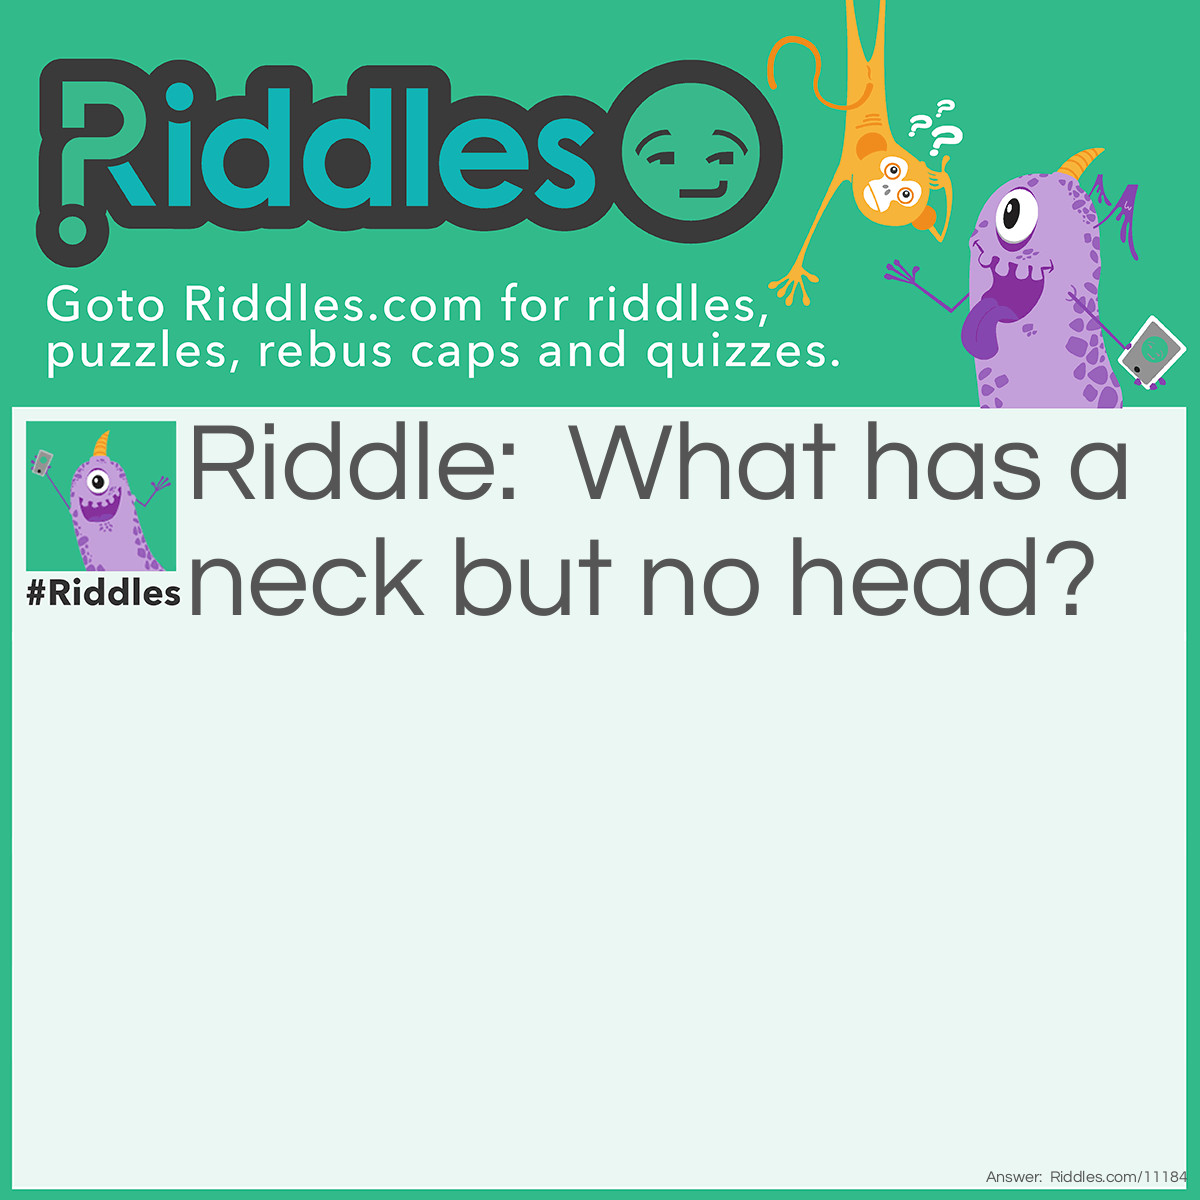 Riddle: What has a neck but no head? Answer: A bottle.